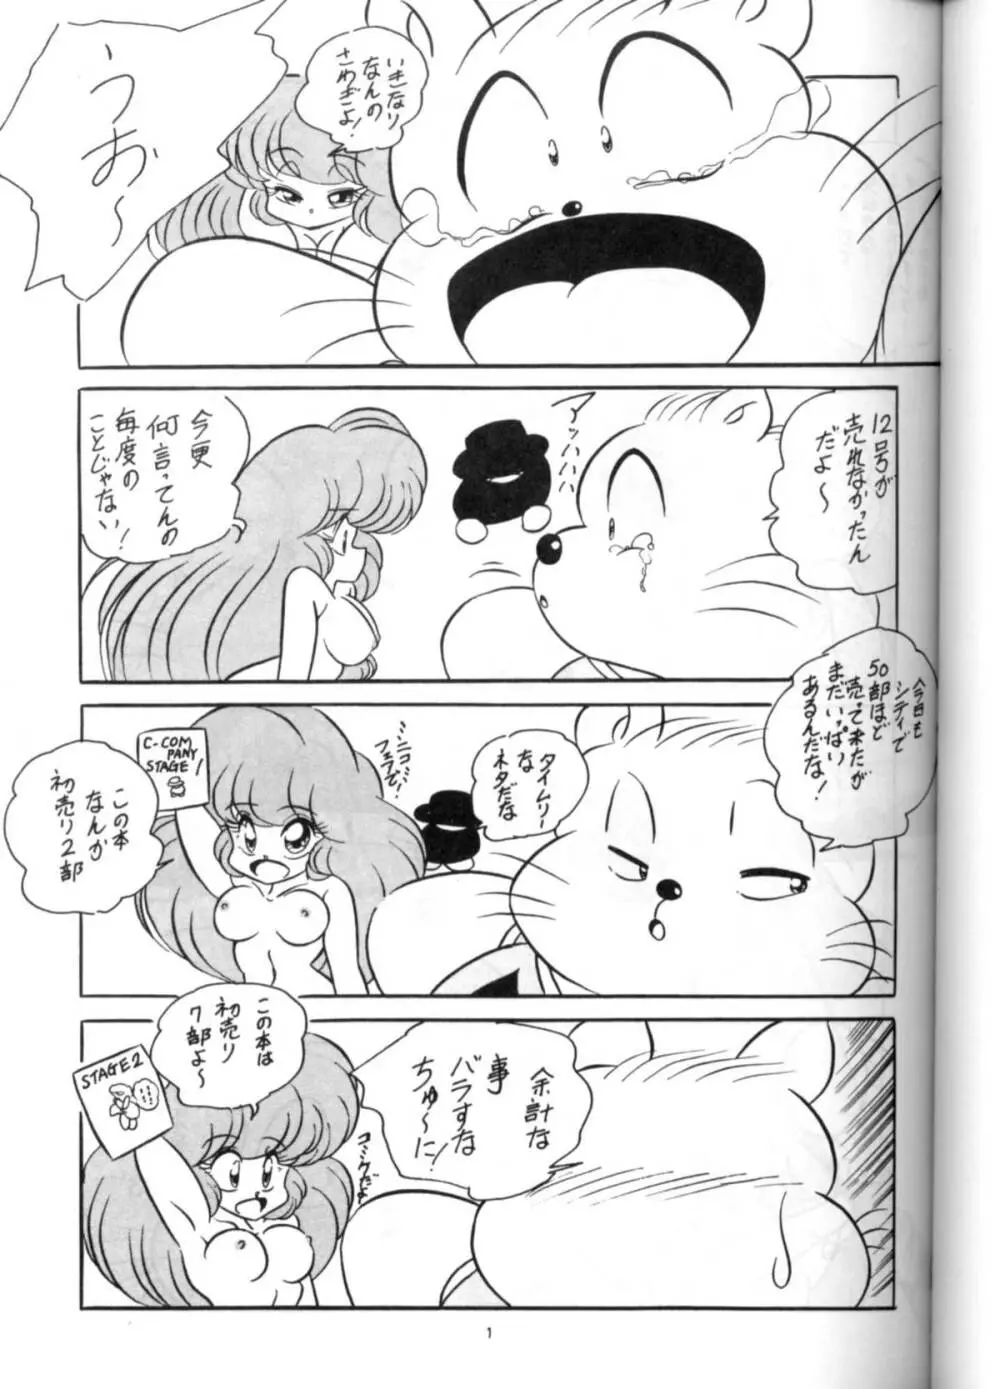 C-COMPANY SPECIAL STAGE 13 Page.2